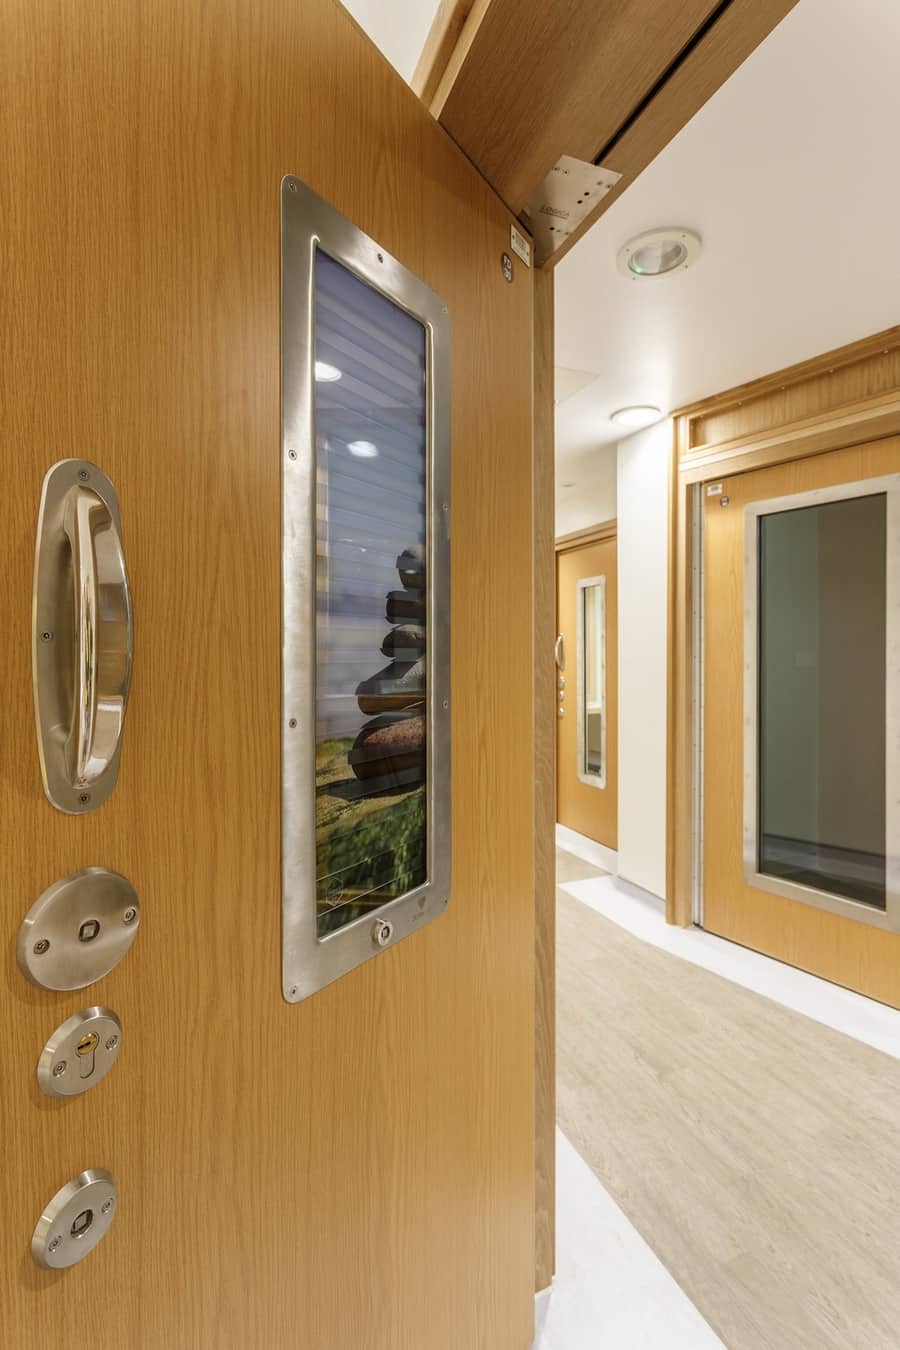  A close up picture of the ironmongery and blind on one of the doors - important details in a construction product shoot 